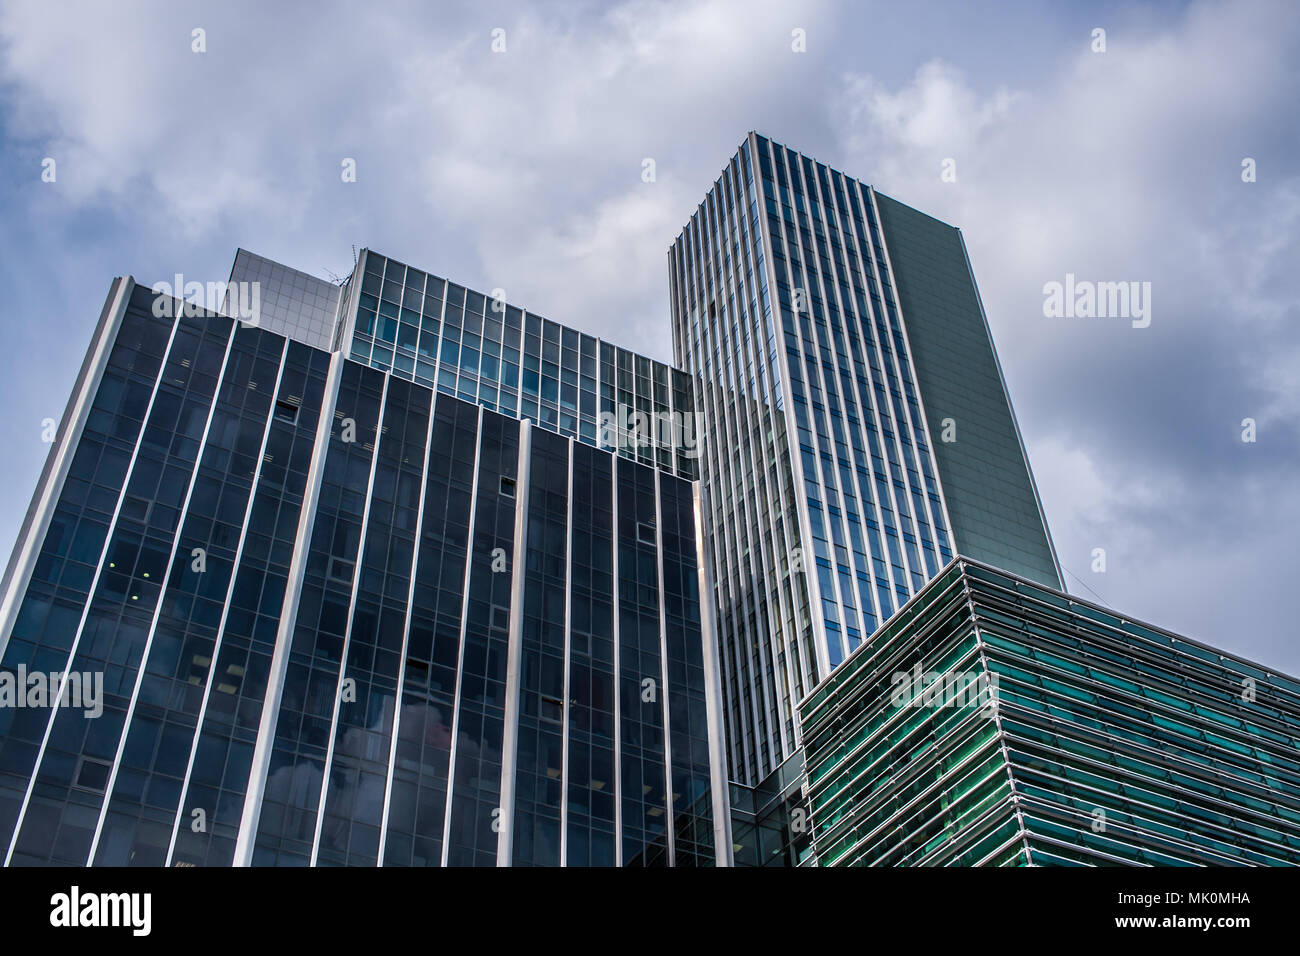 Tightly standing modern glass office buildings against cloudy sky. Stock Photo